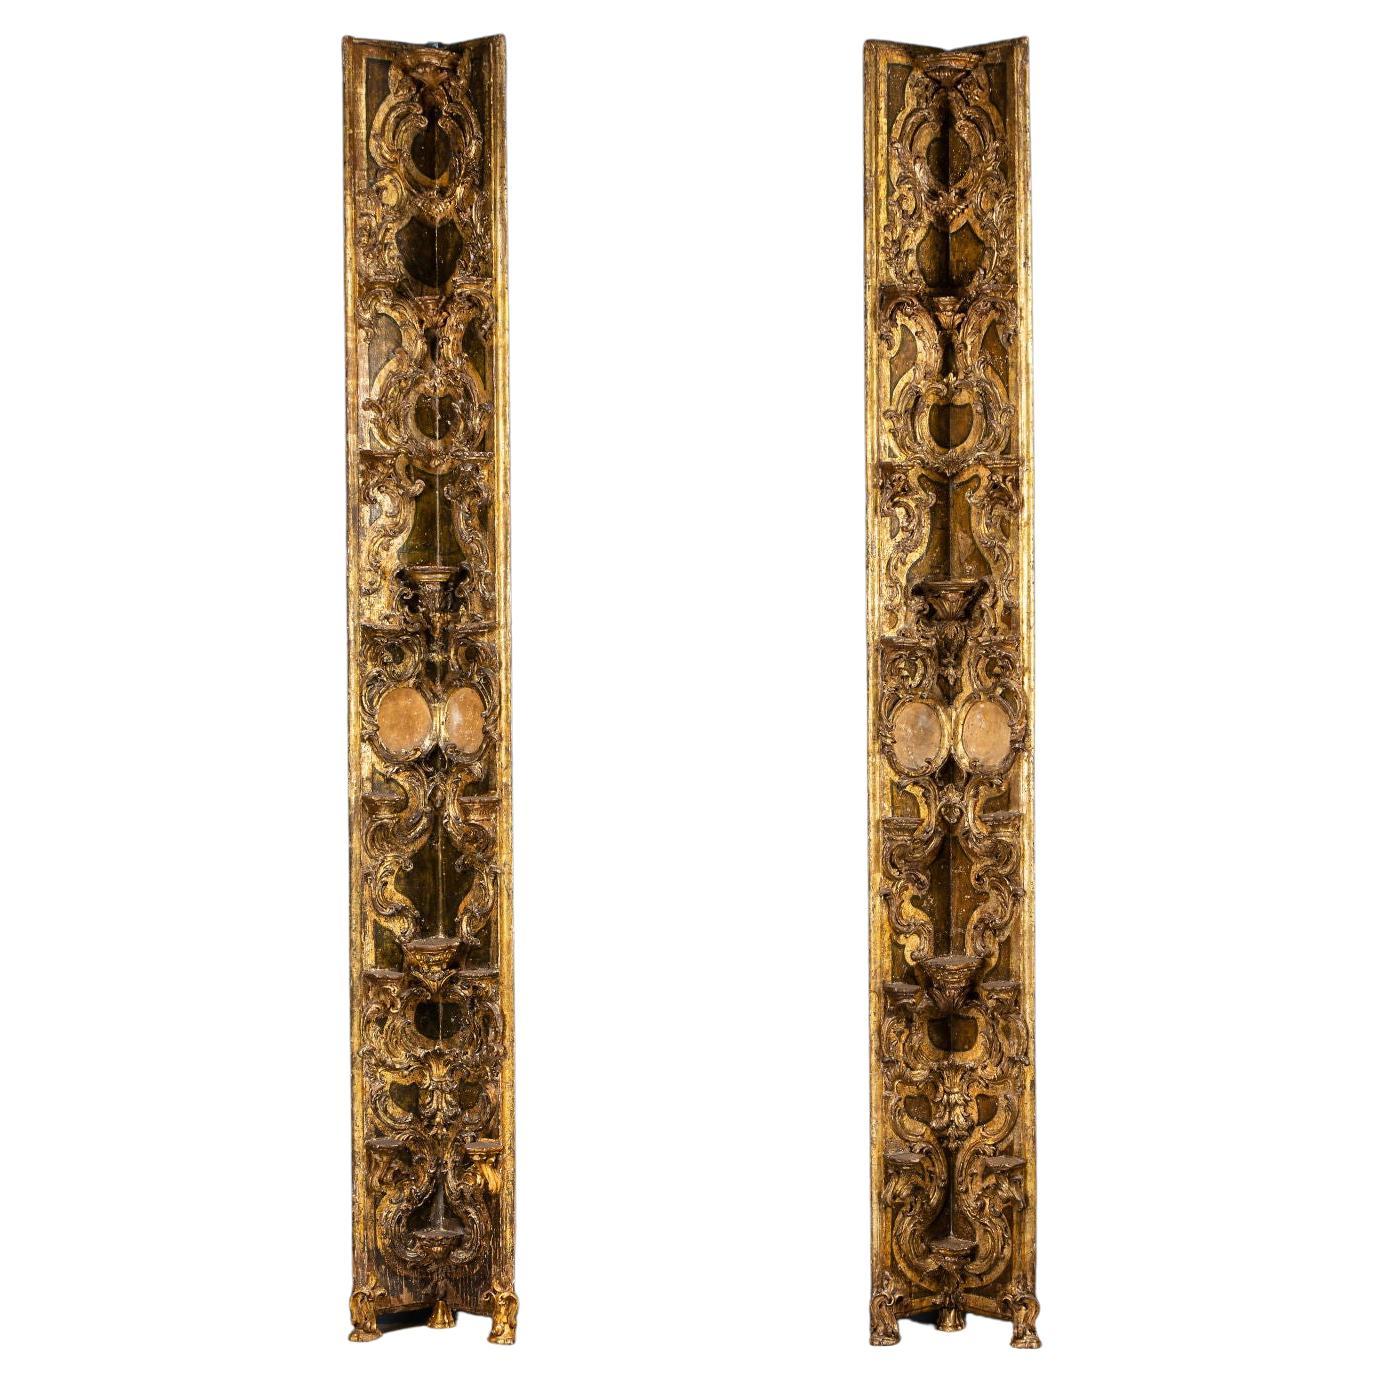 Couple of Corner Pilasters with Ceramic Carved Wood, Italy, 18th Century